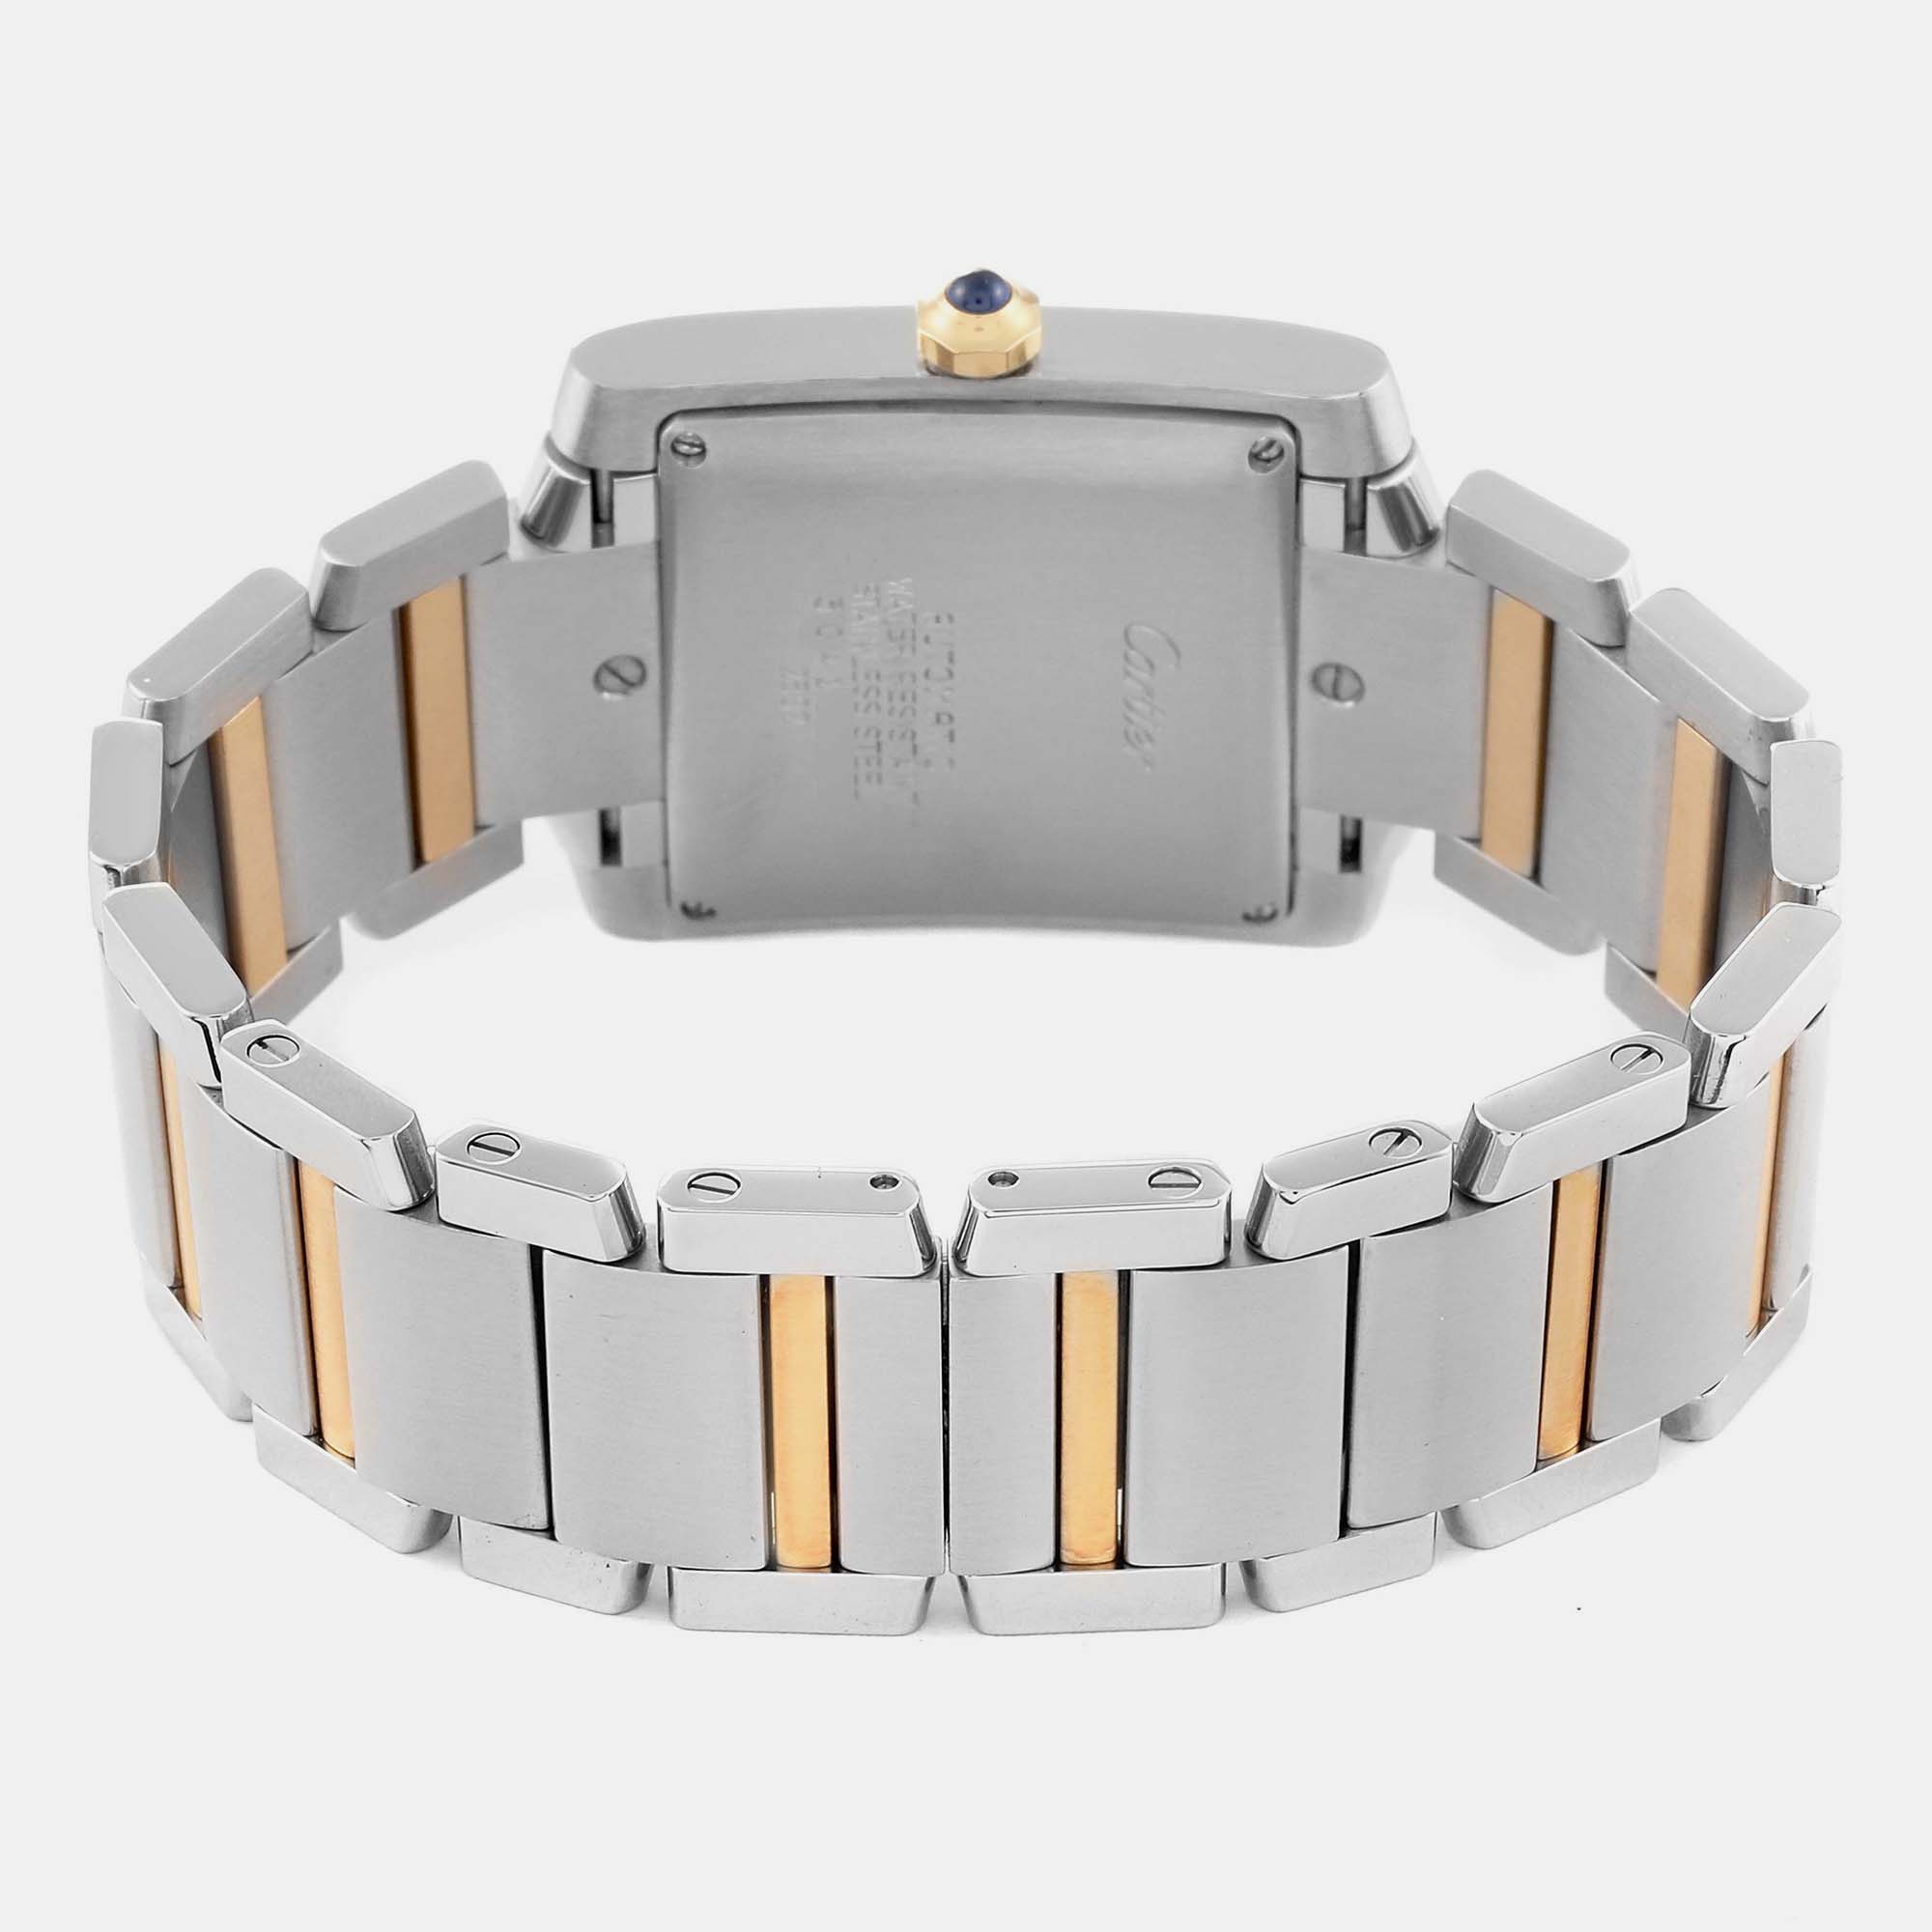 Cartier Tank Francaise Steel Yellow Gold Silver Dial Mens Watch W51005Q4 28.0 Mm X 32.0 Mm